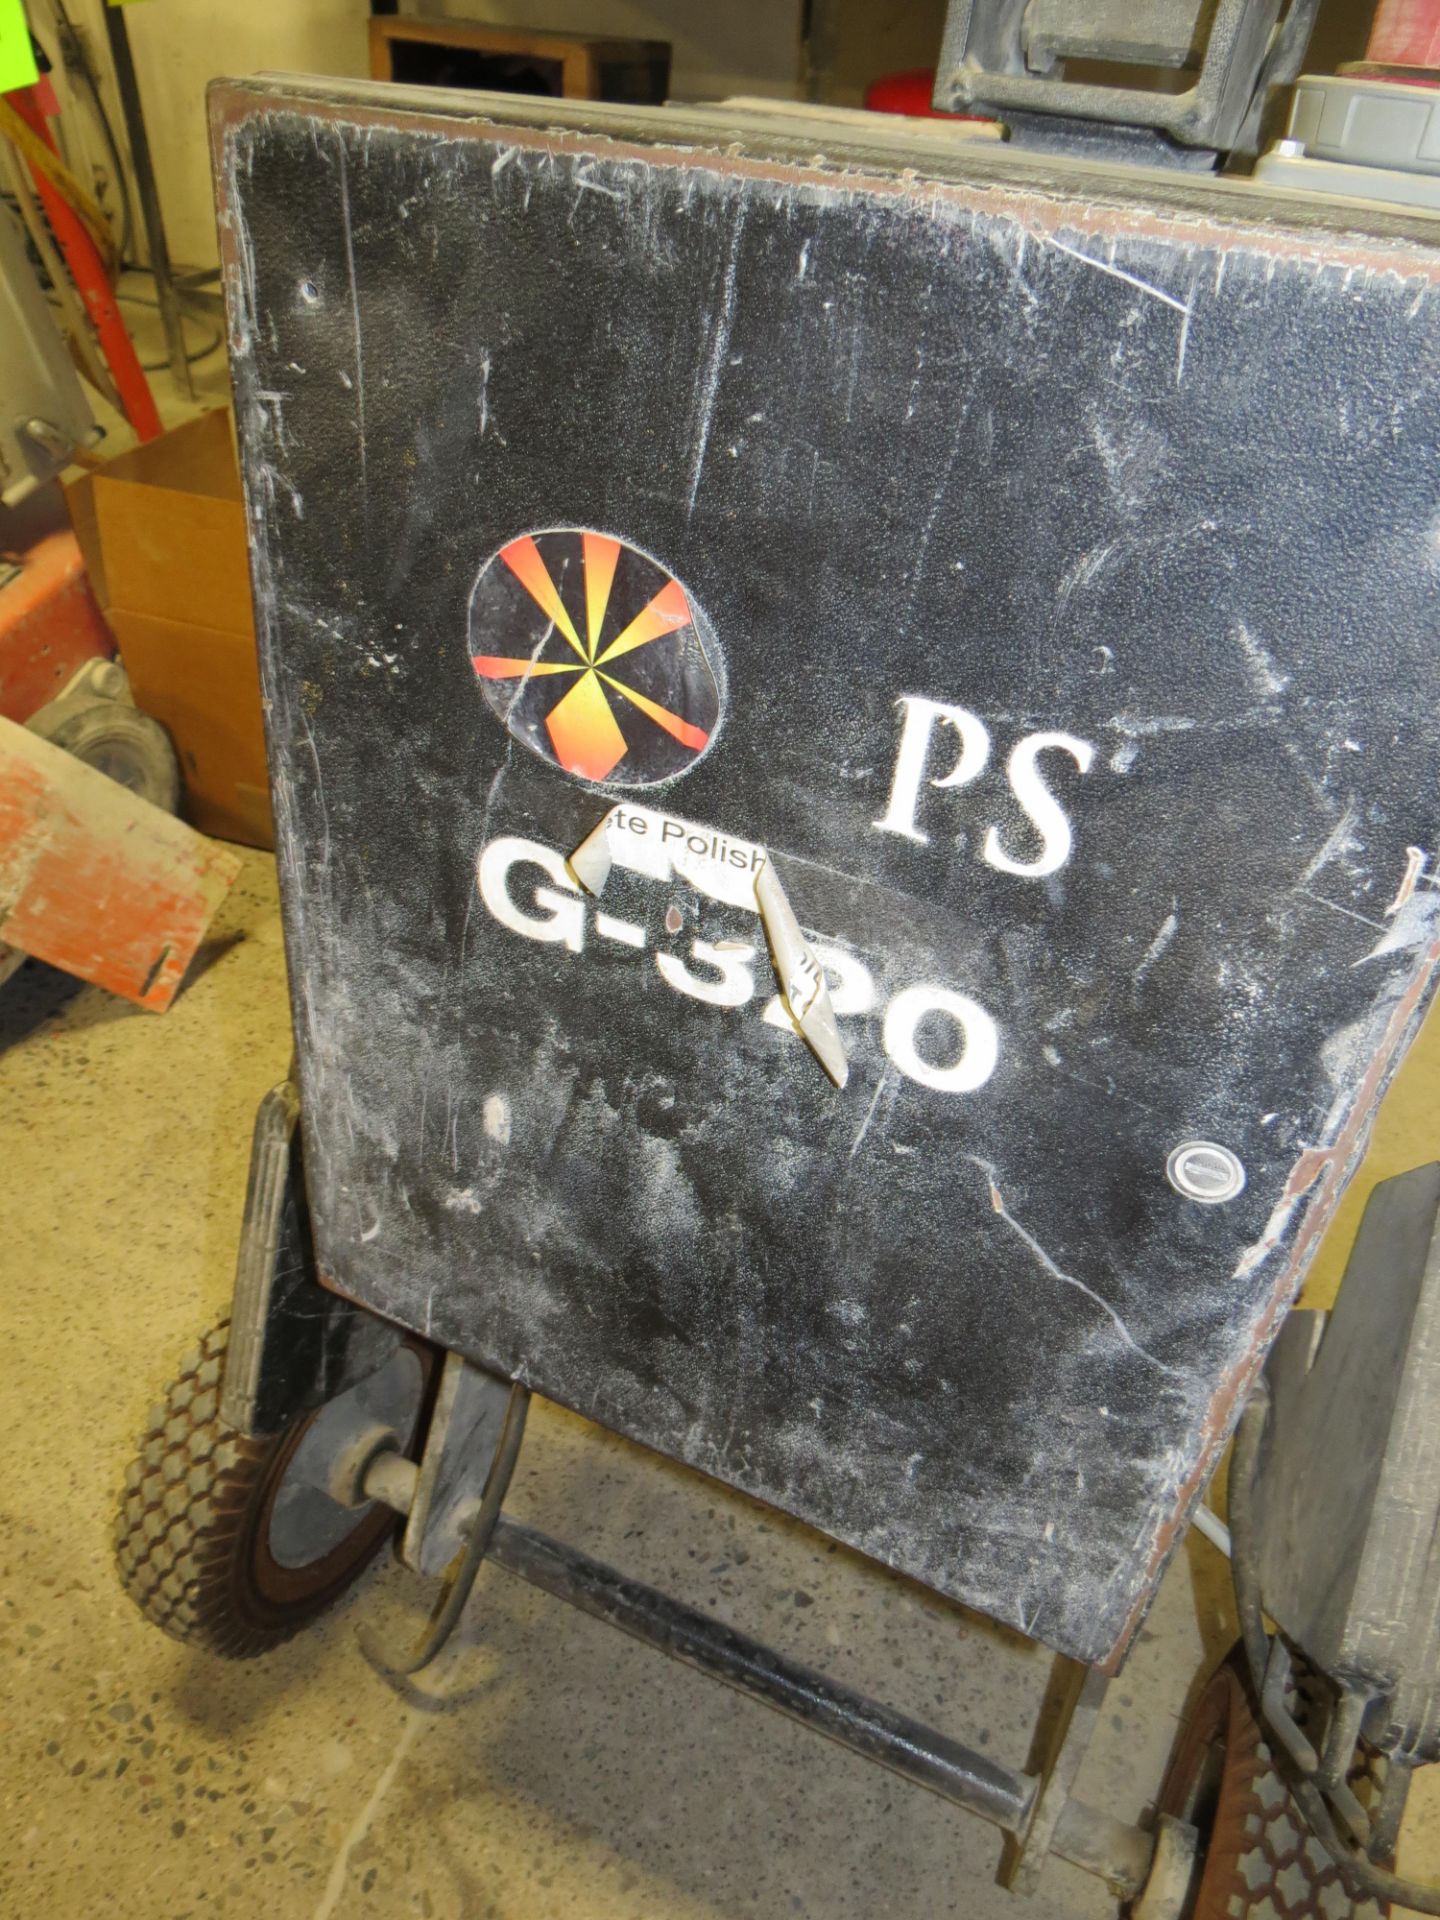 CPS G-320 Concrete Polishing Solutions--Parts Only) Will Be Sold Subject To Confirmation - Image 3 of 3